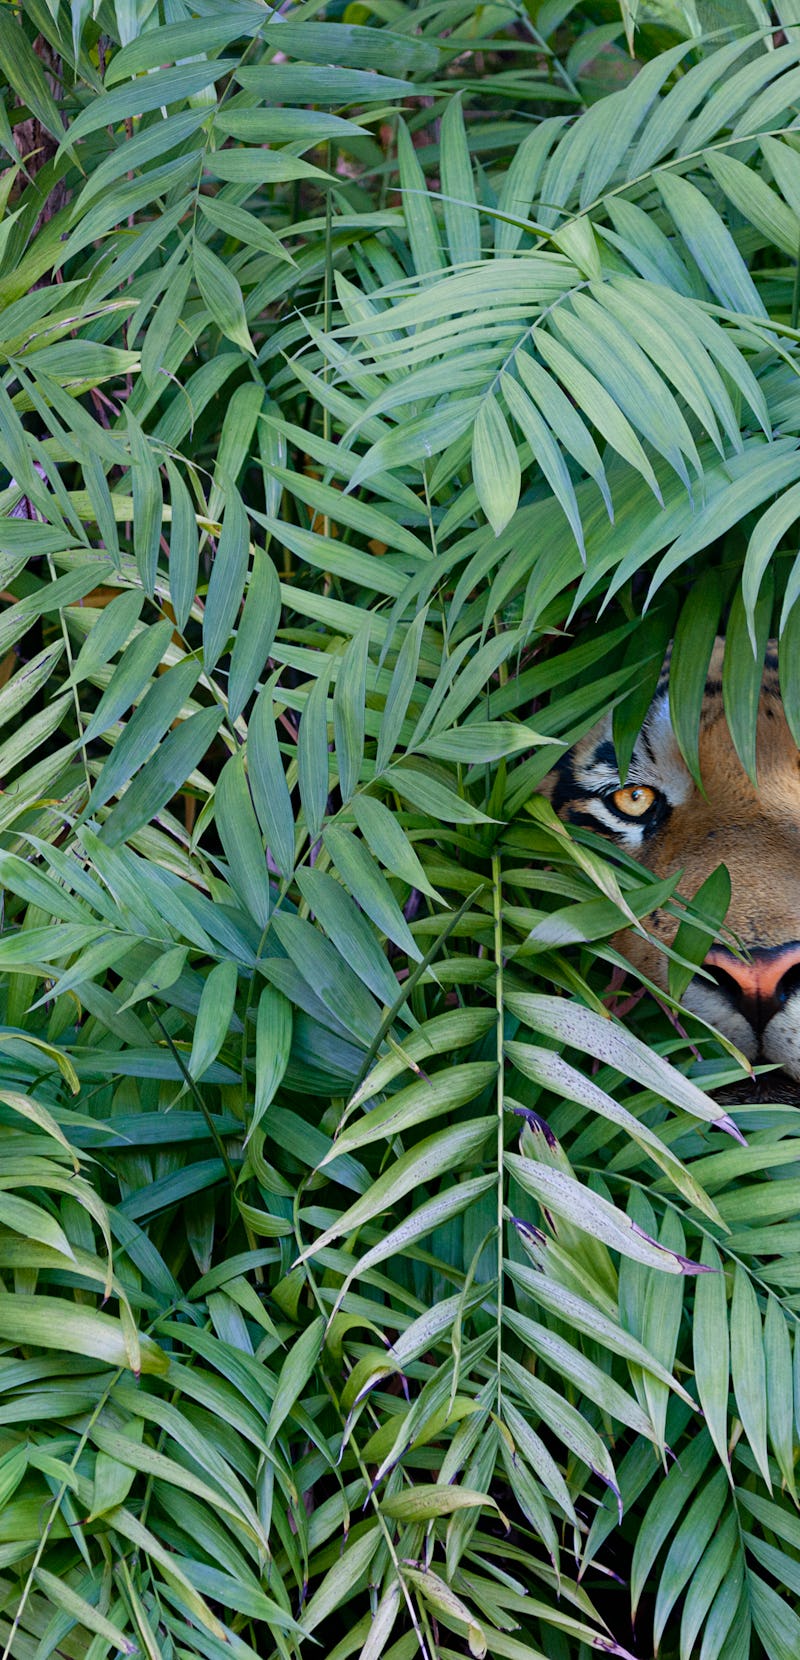 Tiger hiding in forest